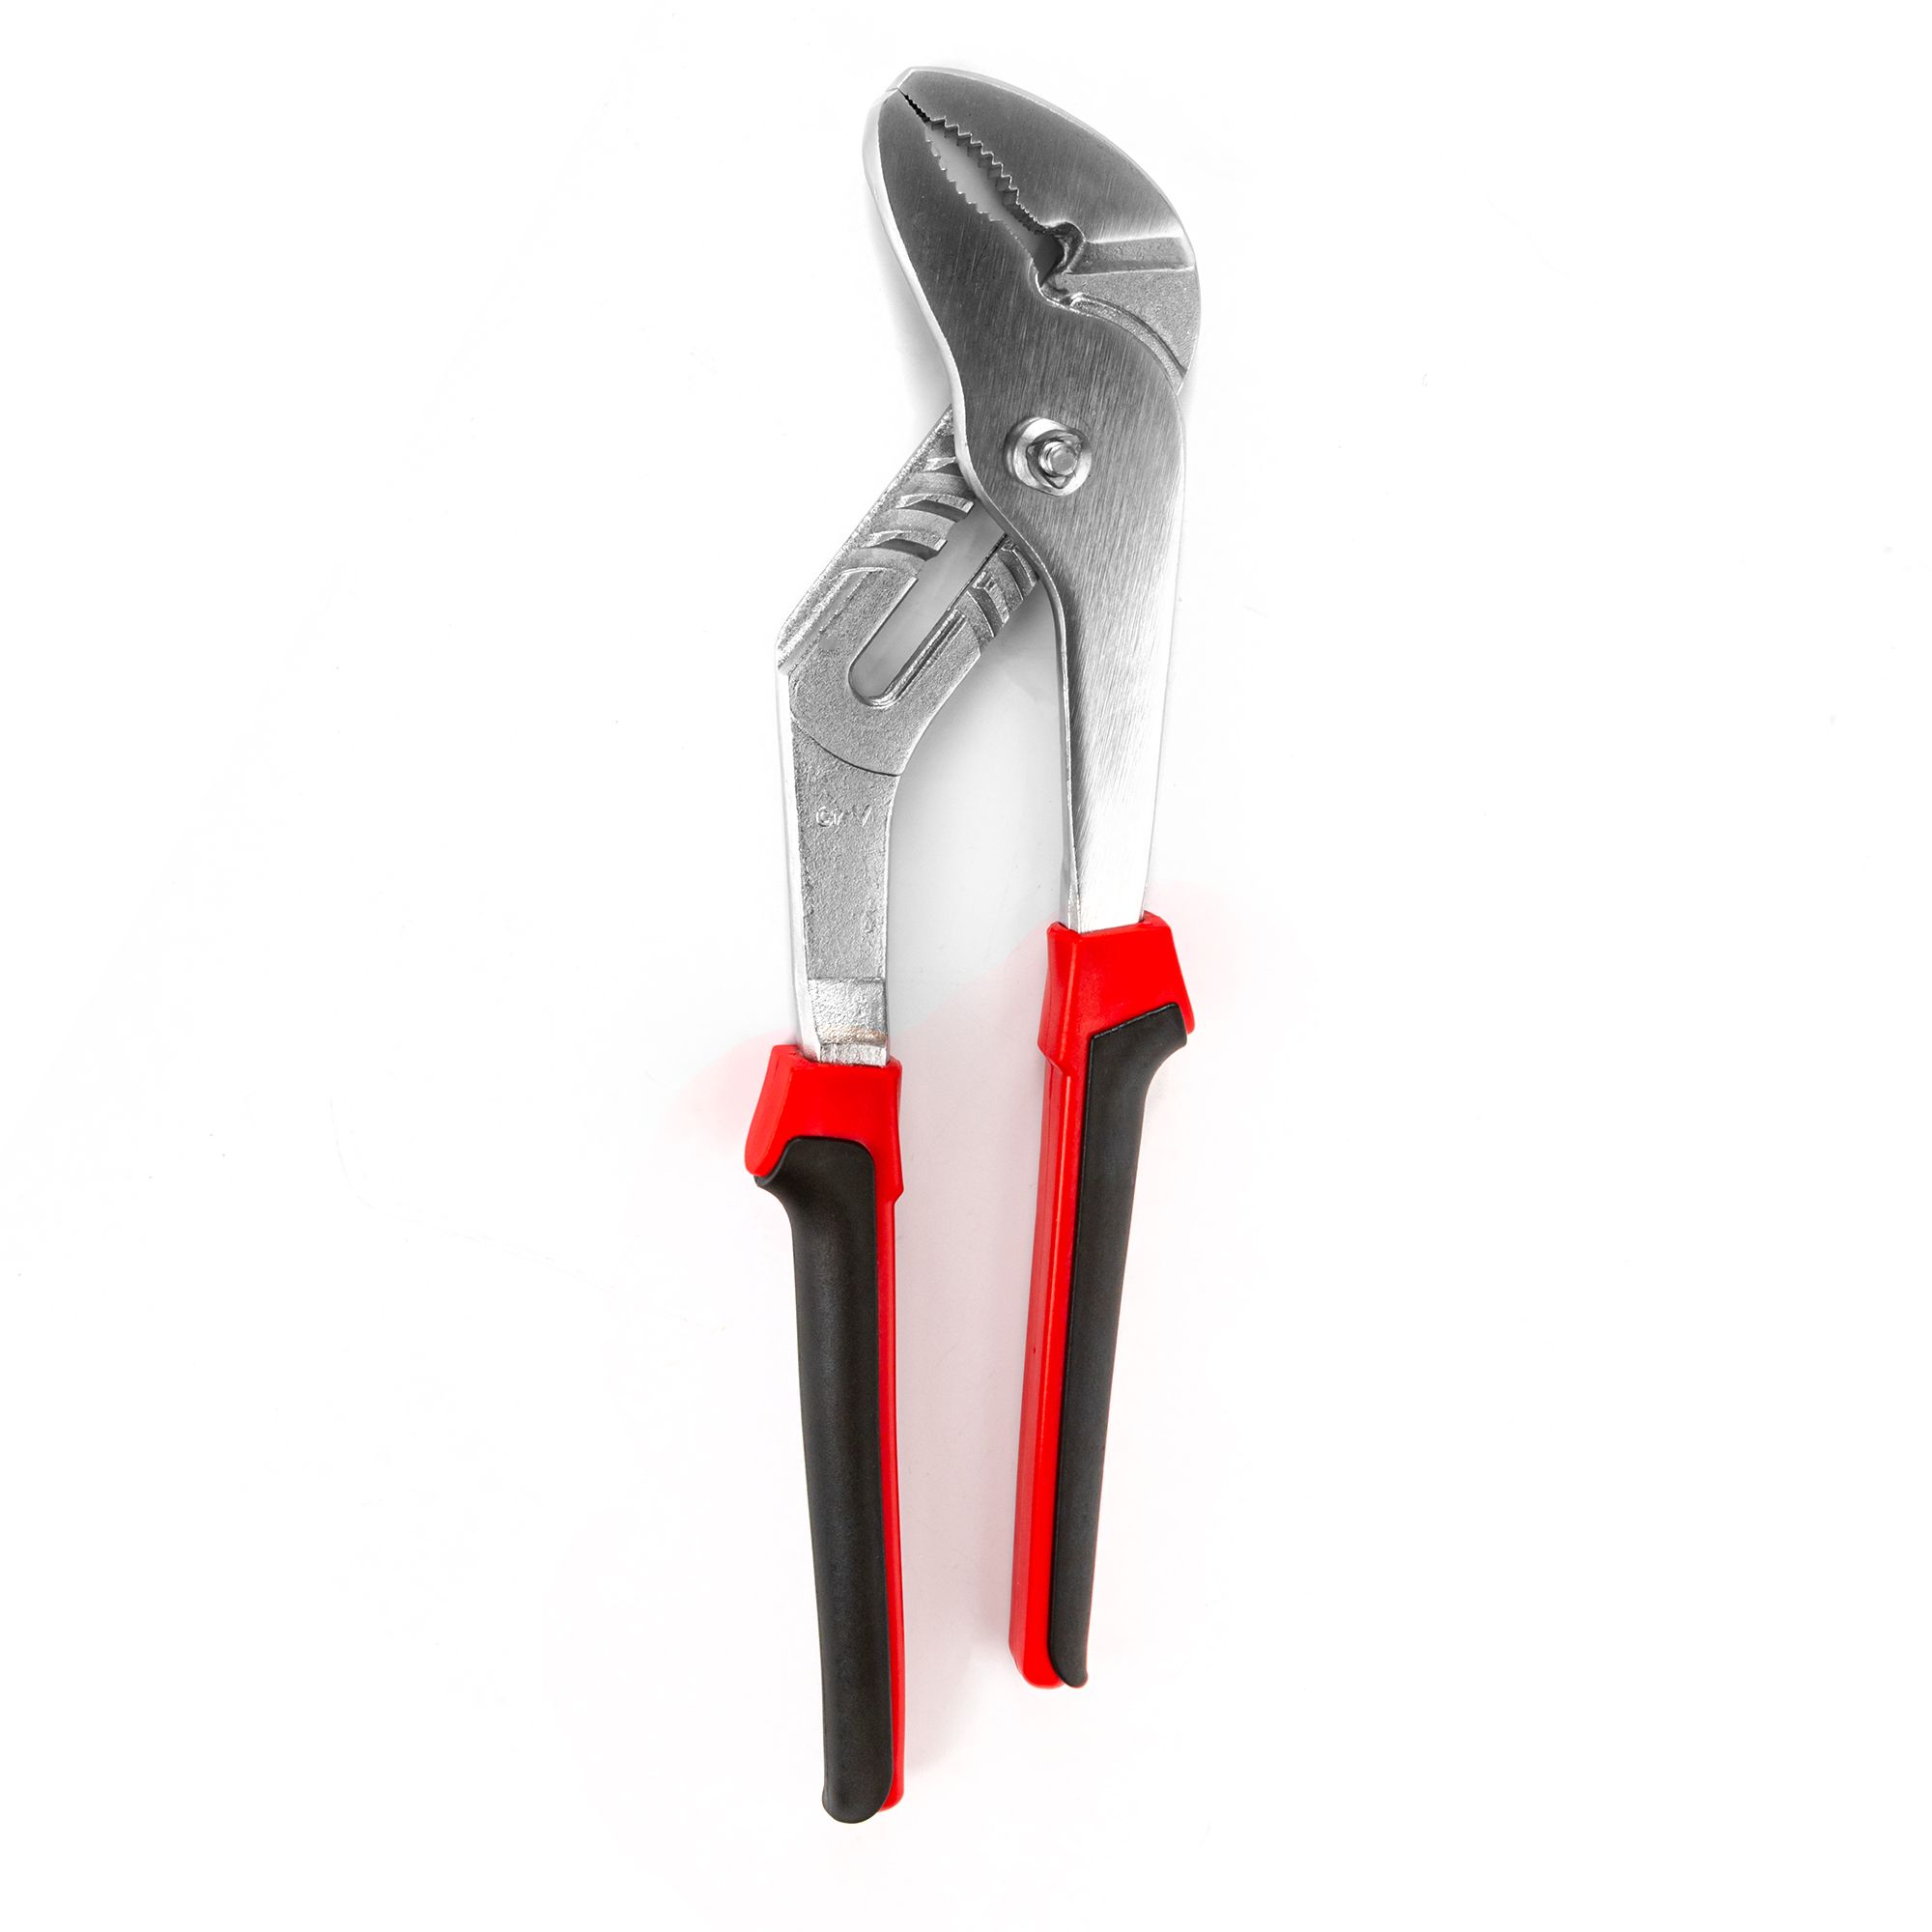 Rothenberger 12" Groove joint pliers